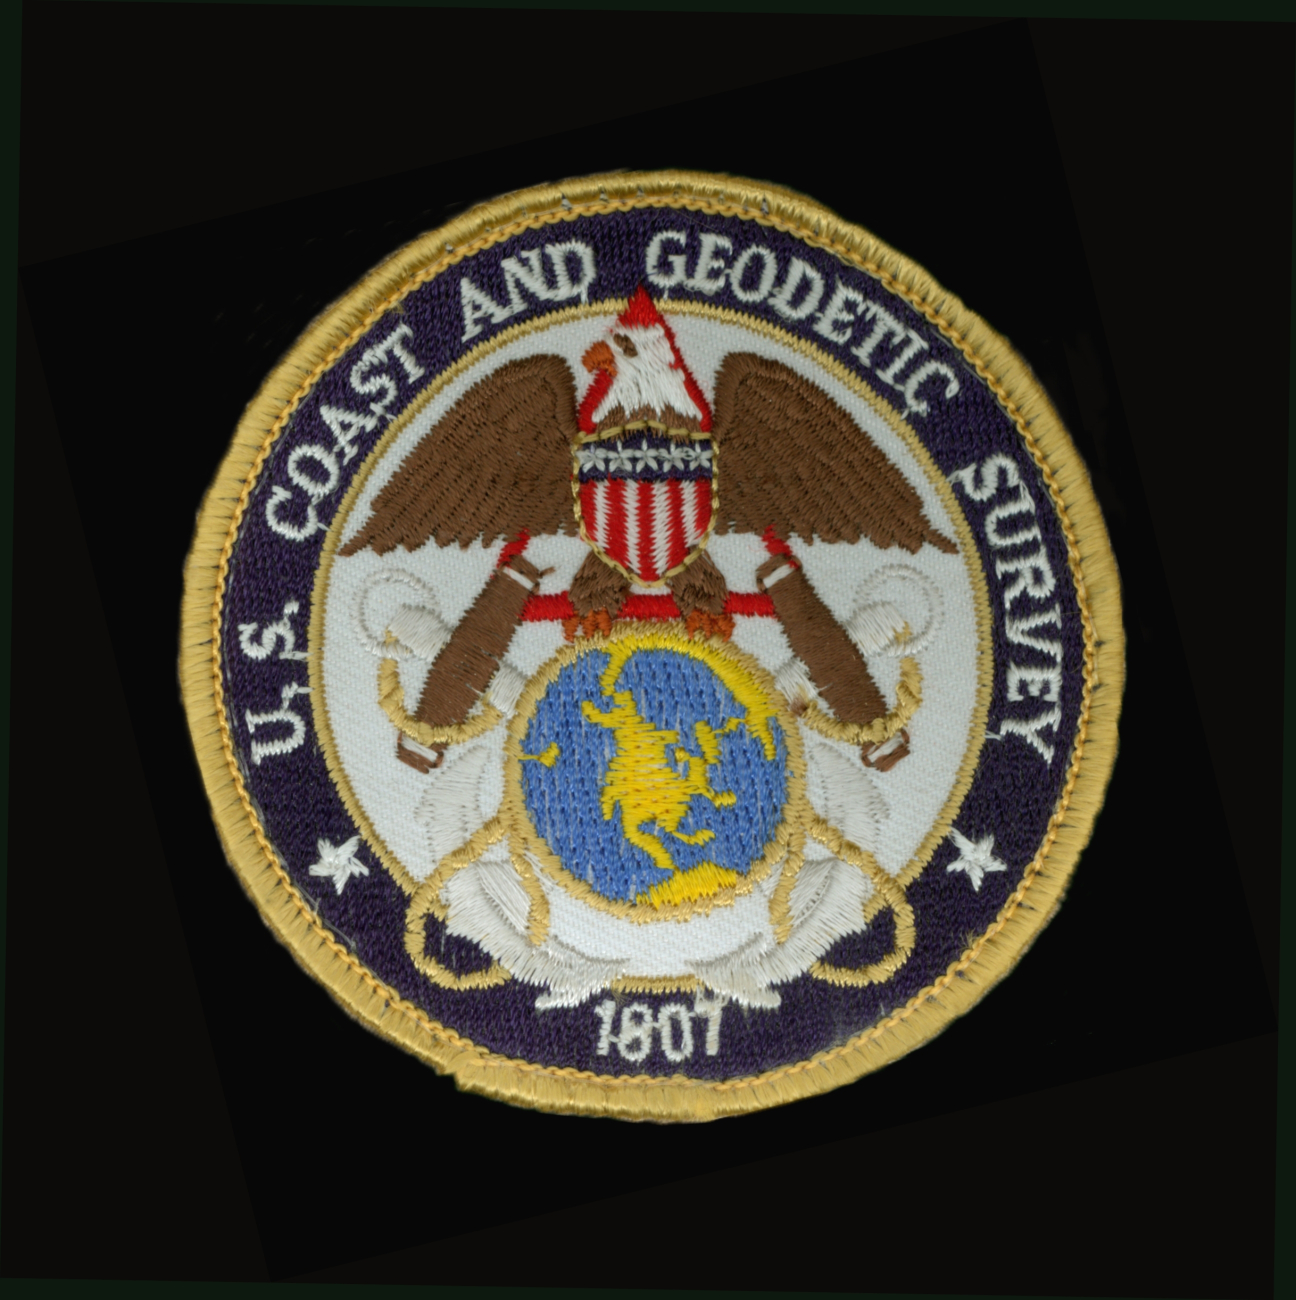 Patch commemorating United States Coast and Geodetic Survey